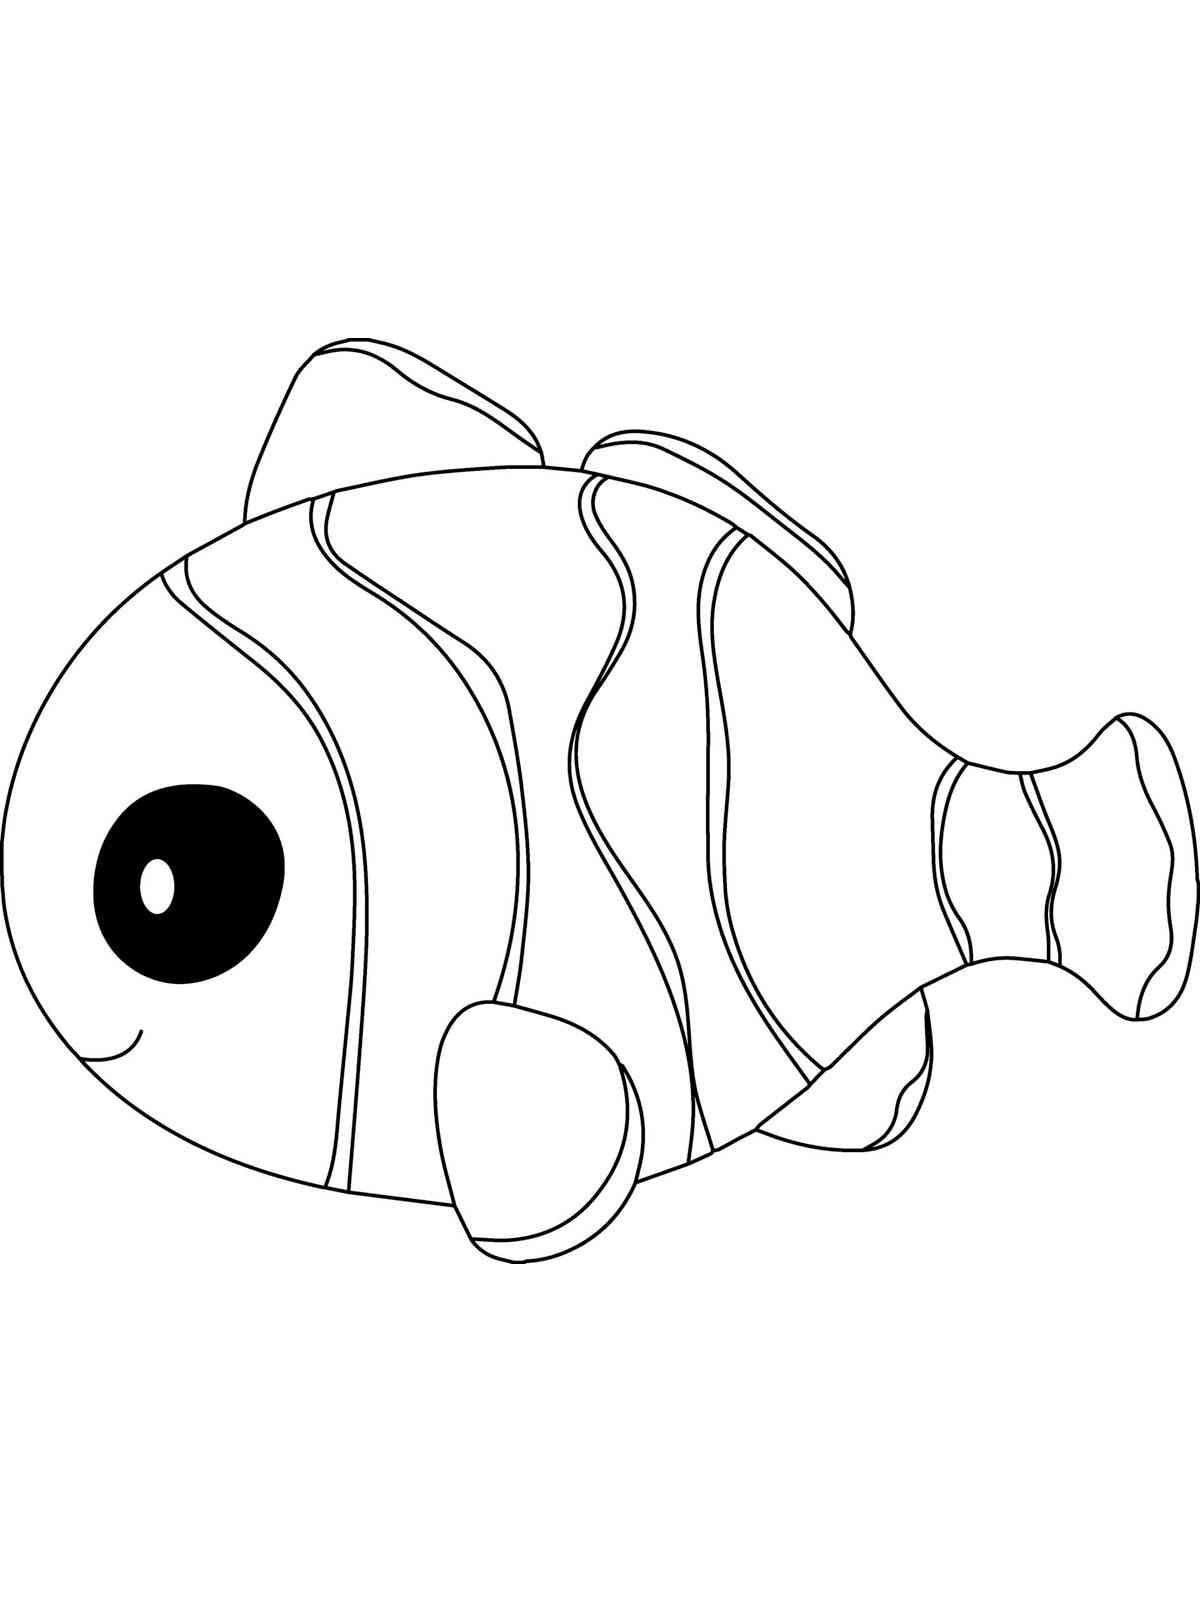 Clownfish 2 coloring page